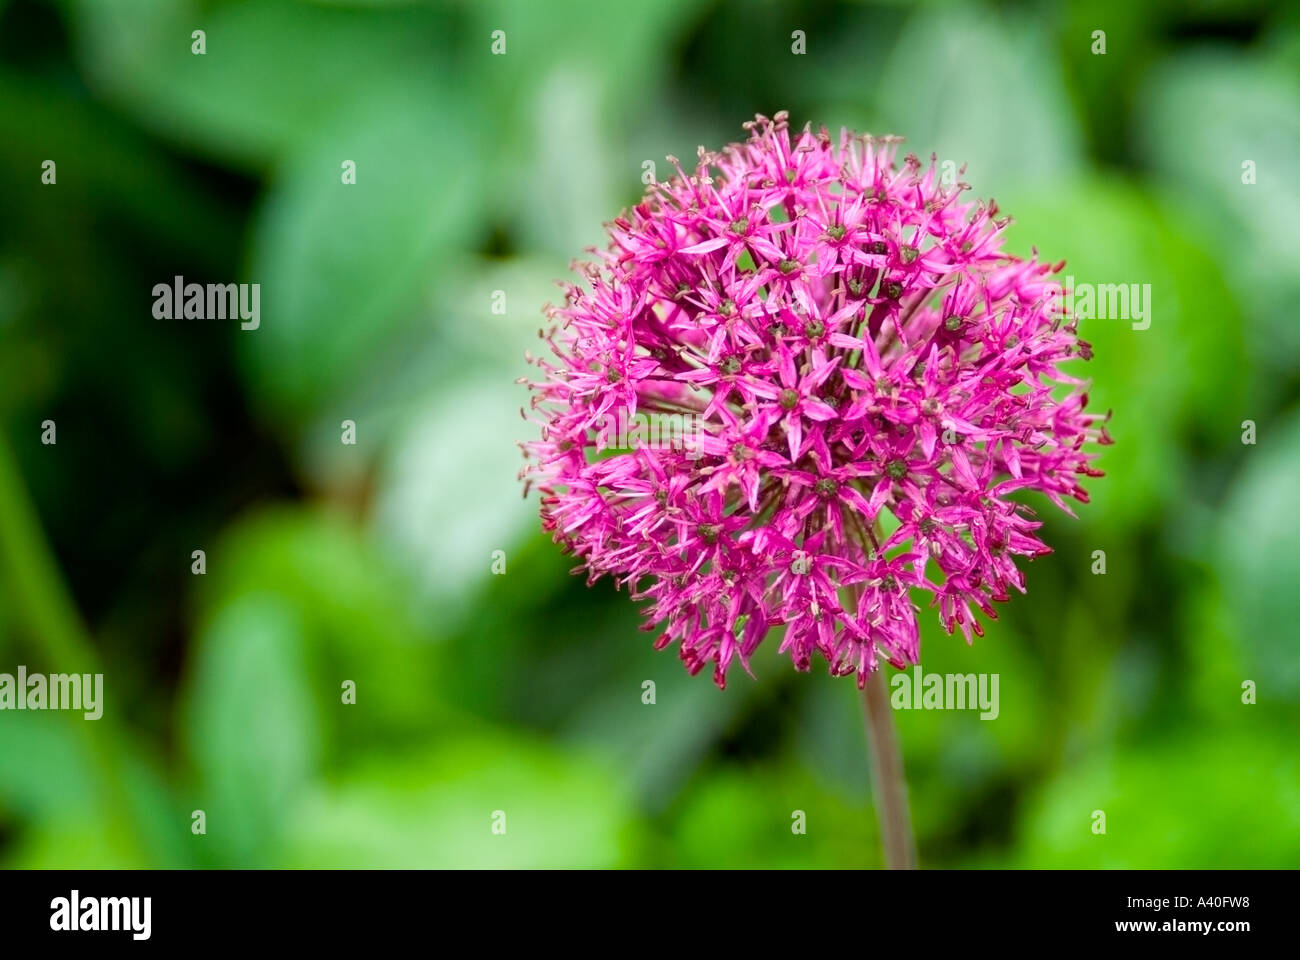 Starry florets of a spherical Allium bloom against soft focused leaves Stock Photo